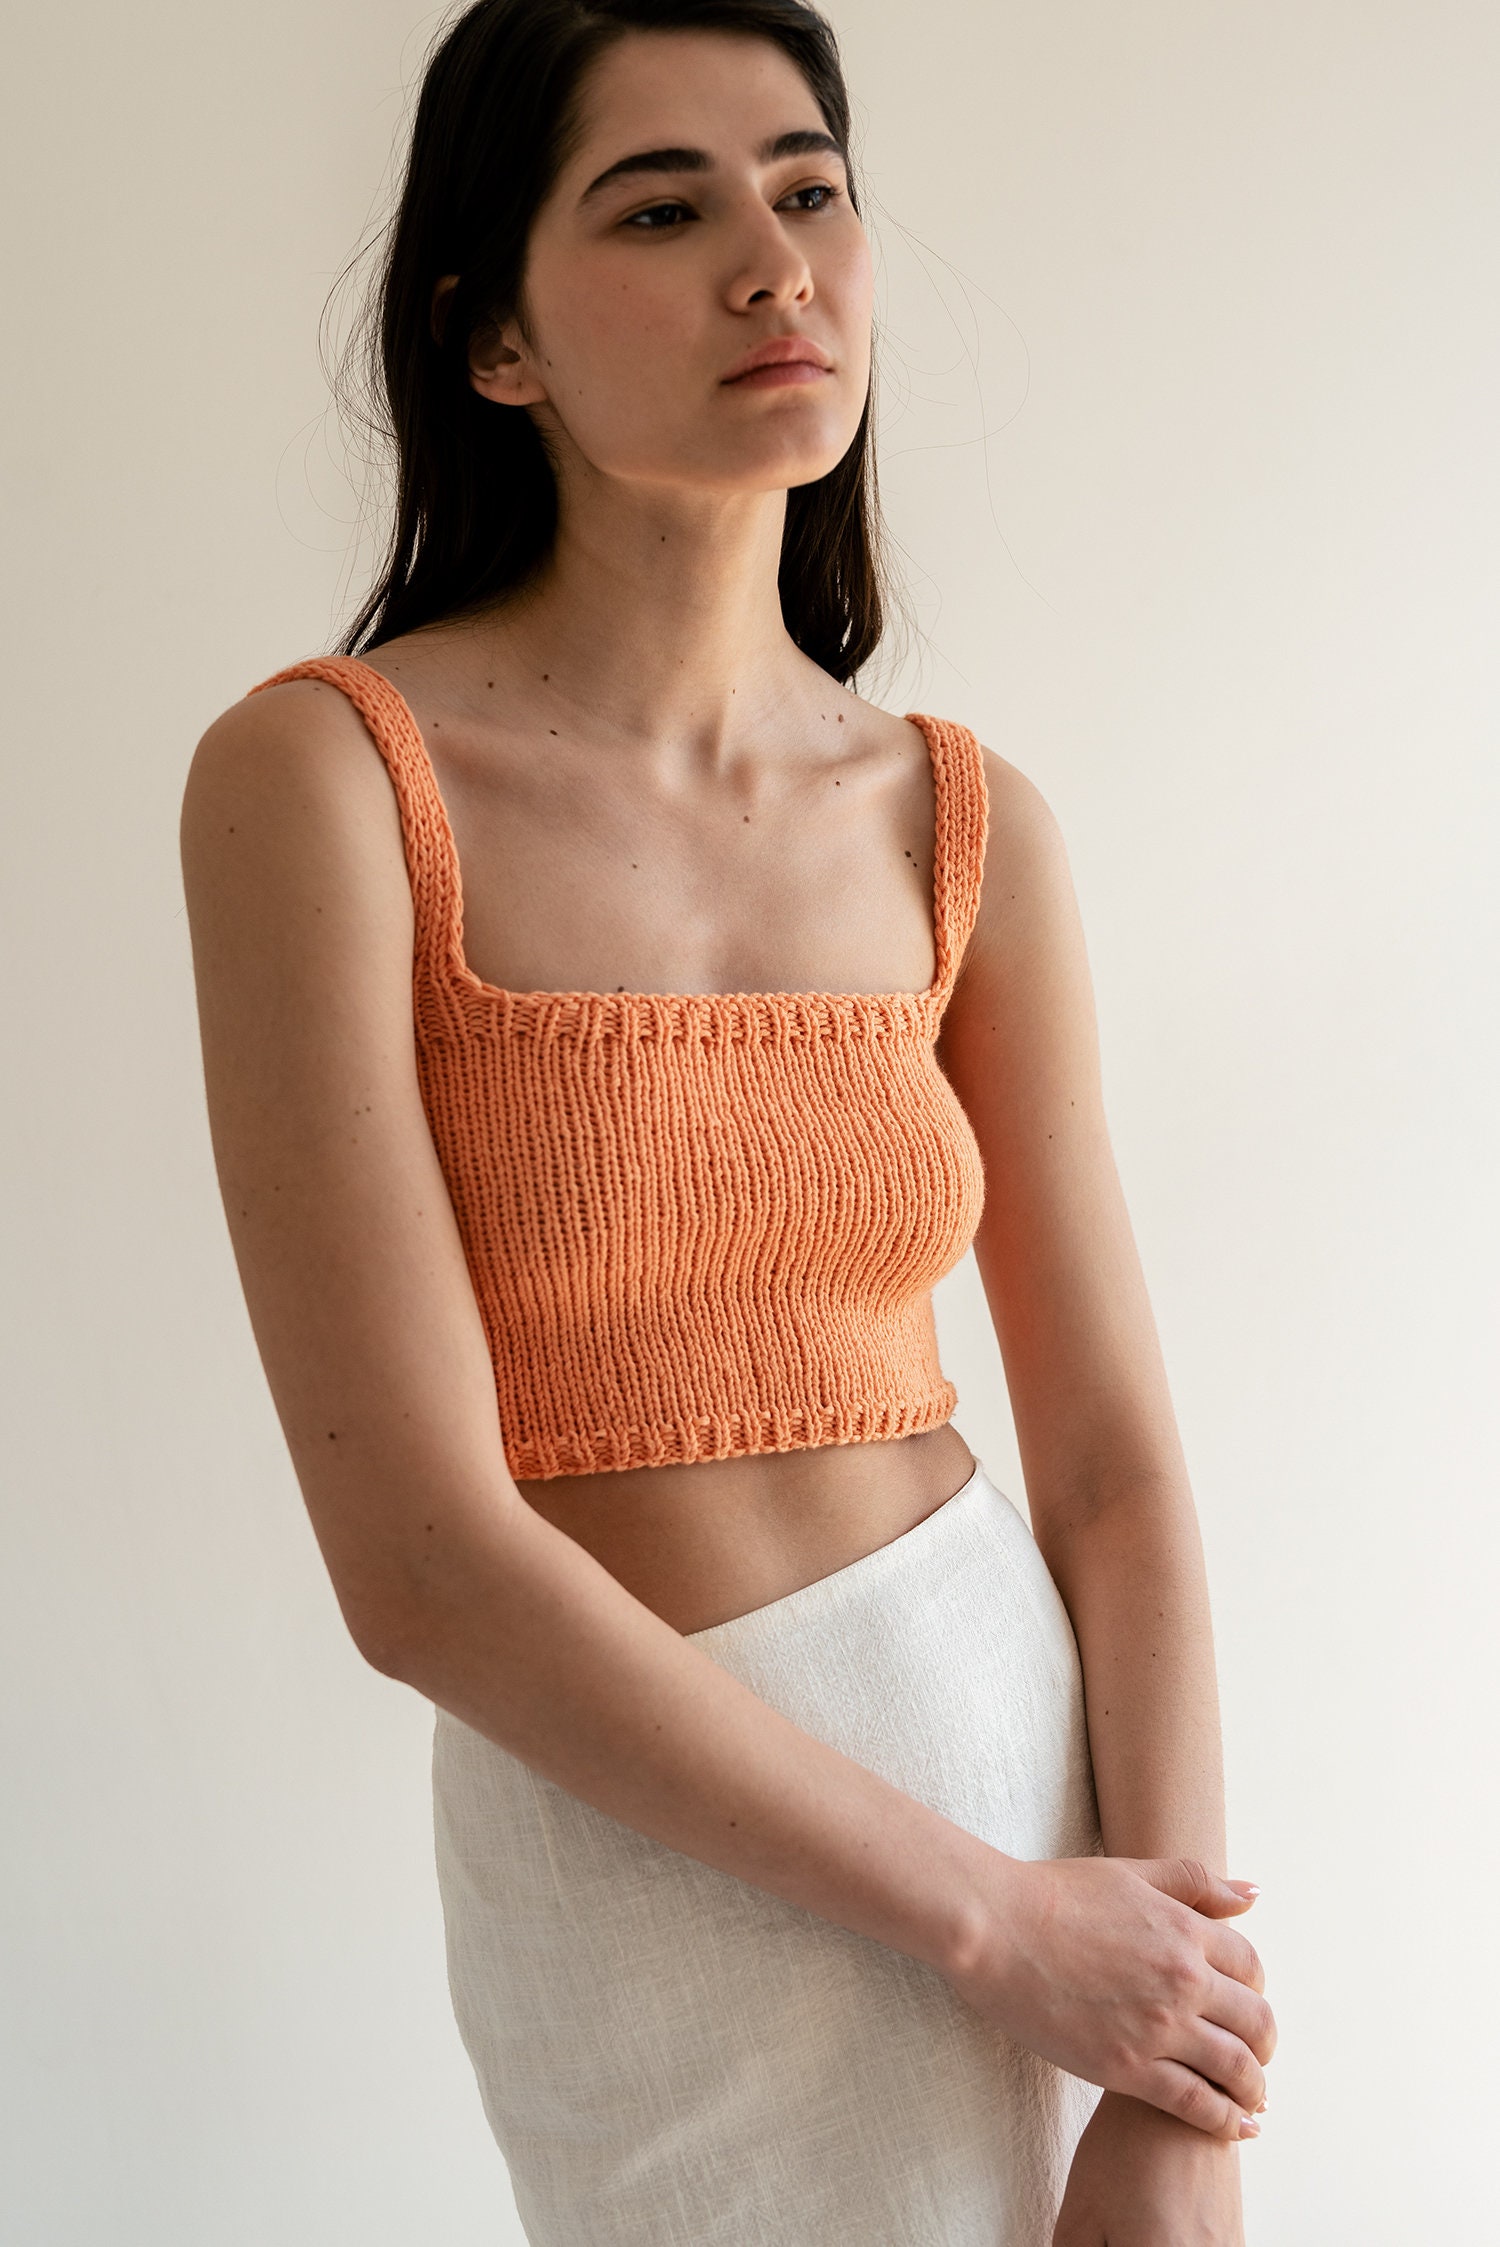 Square Neck Crop Top, Minimal Knit Top, Hand Knit Bralette Top, Black  Cropped Yoga Top, Square Neckline, Sports Knit Bra, Fitted Cotton Top -   Canada